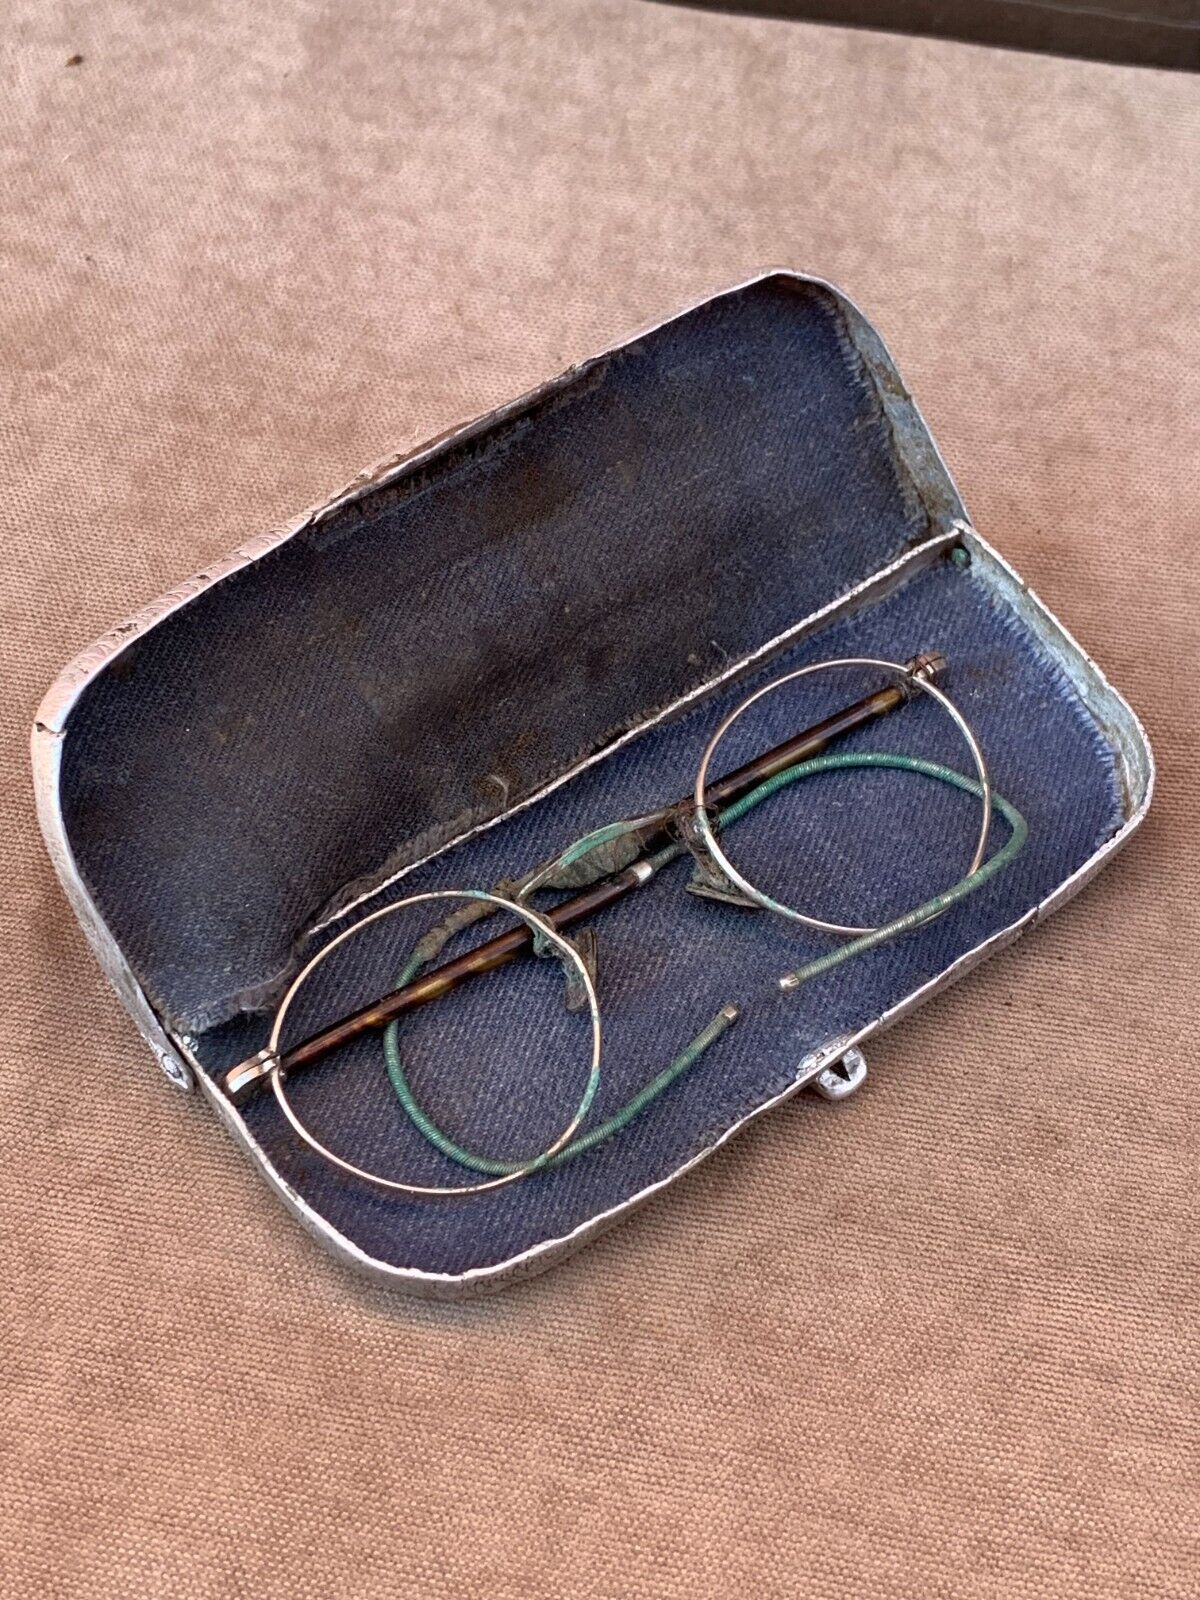 WW2. WWII. German glasses captured by a Red Army soldier. Wehrmacht.